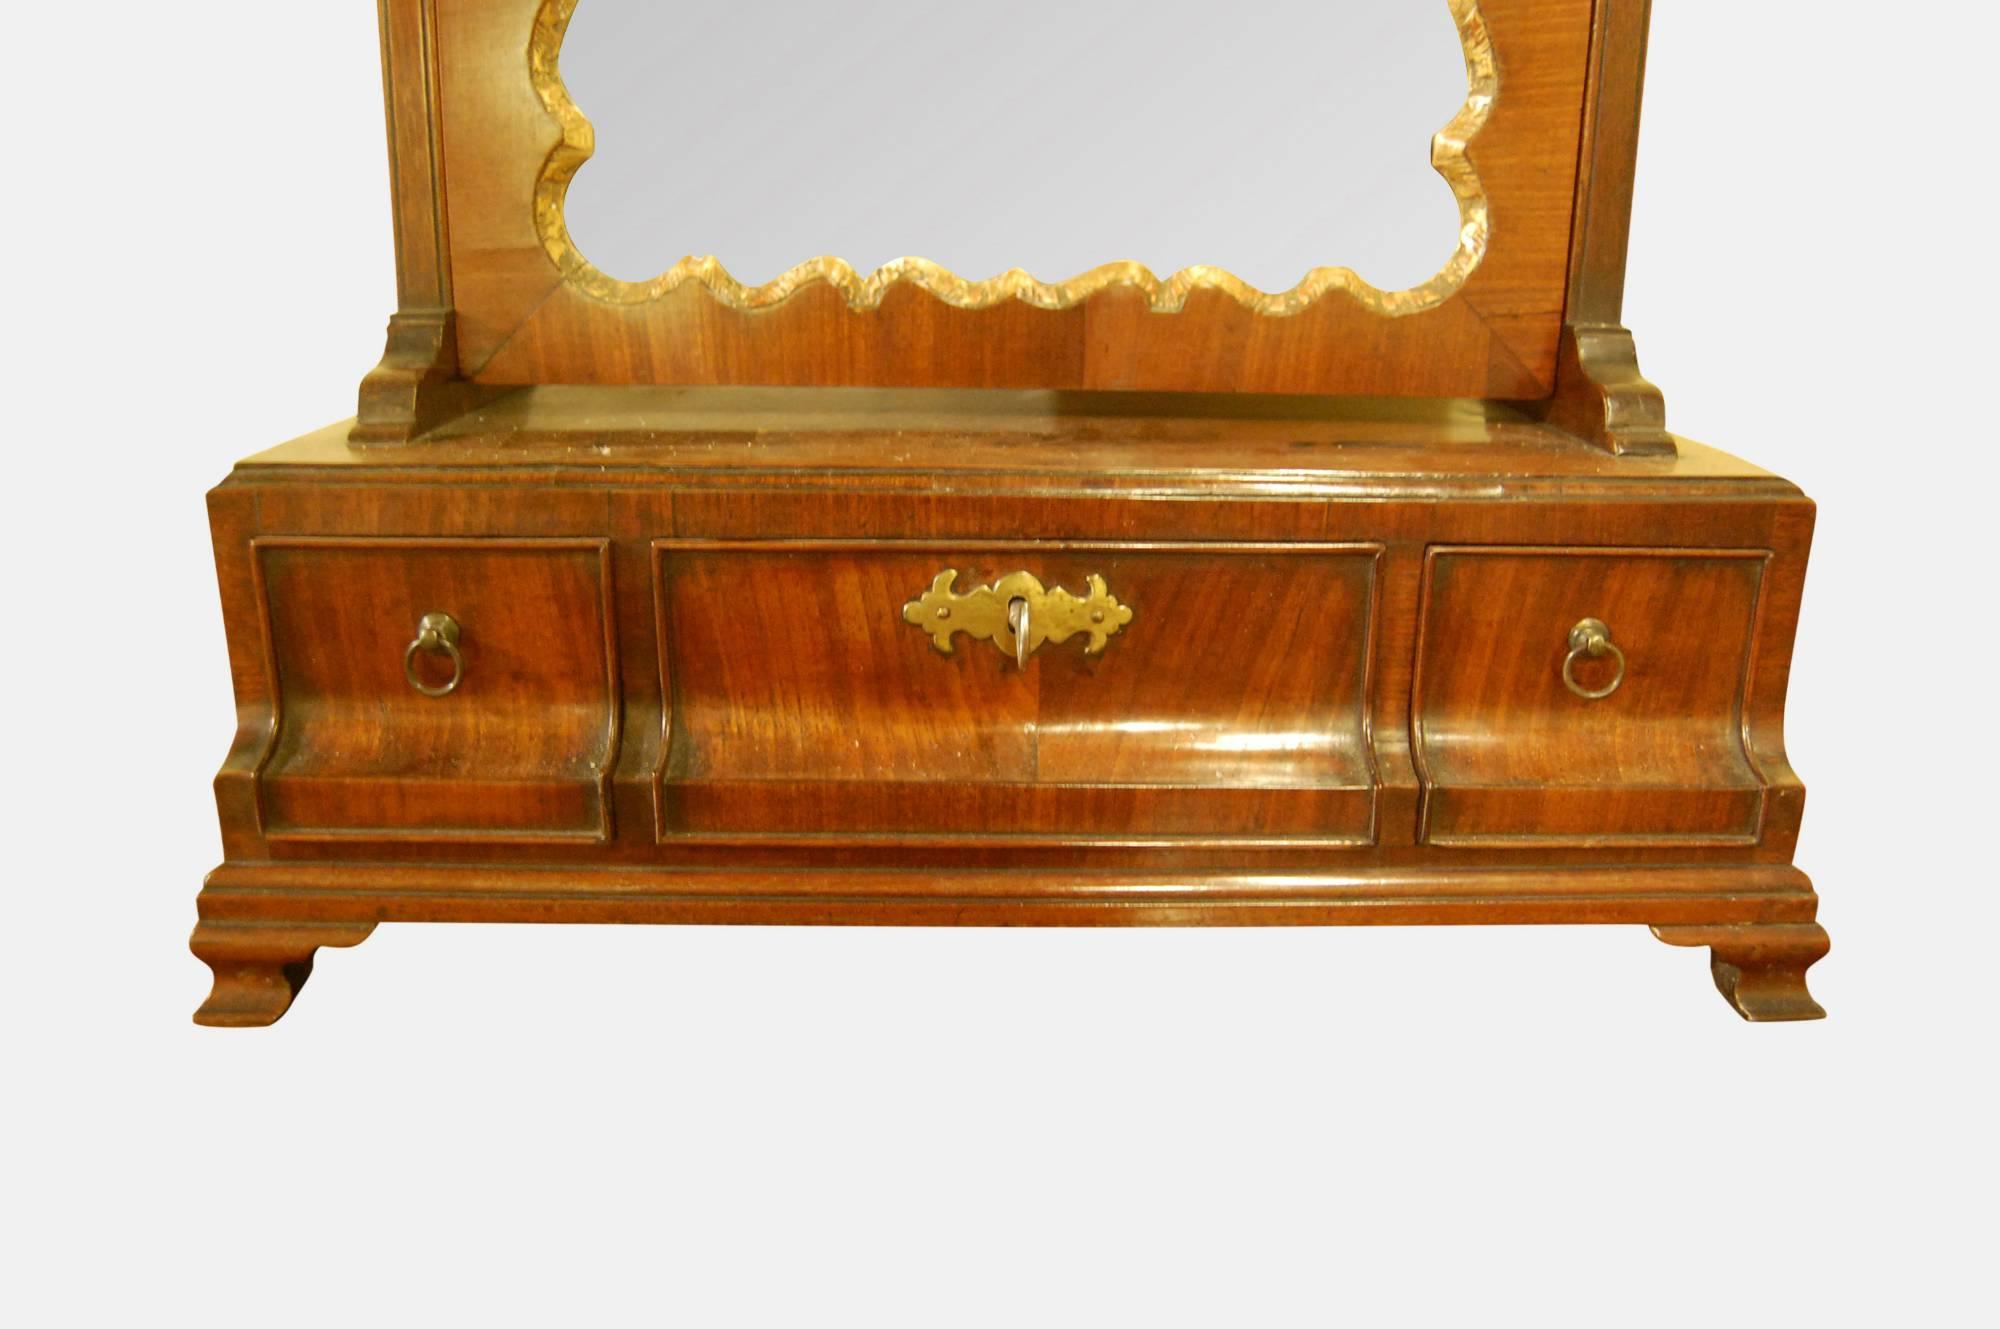 18th Century Mahogany and Parcel-Gilt Toilet Glass For Sale